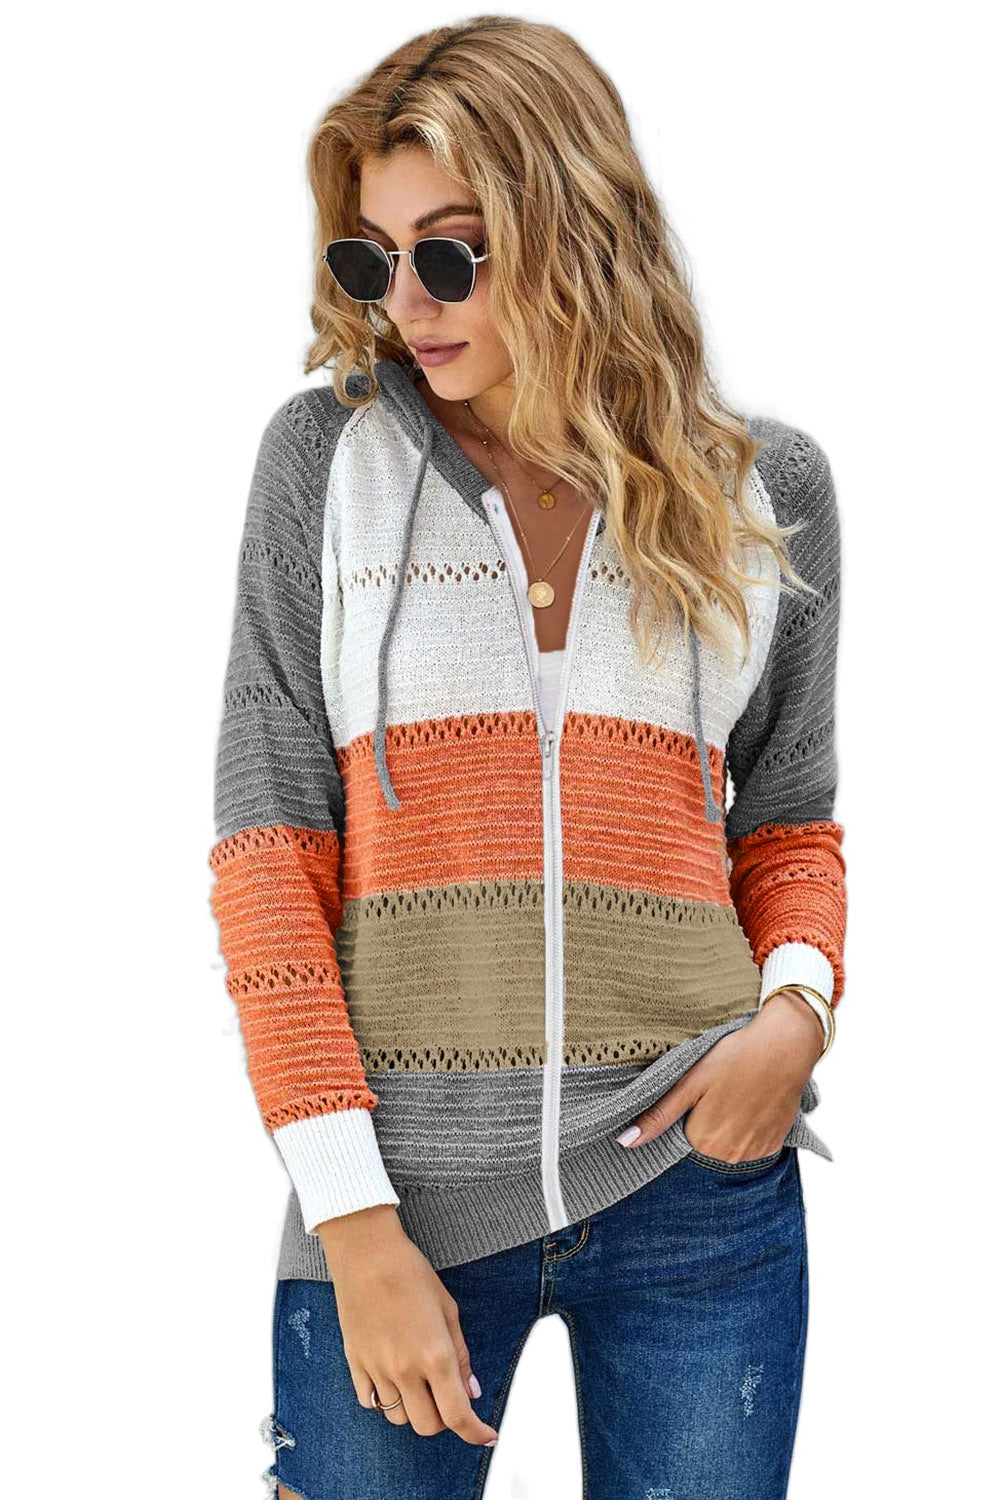 Gray Zipped Front Colorblock Hollow-out Knit Hoodie Sweatshirts & Hoodies JT's Designer Fashion